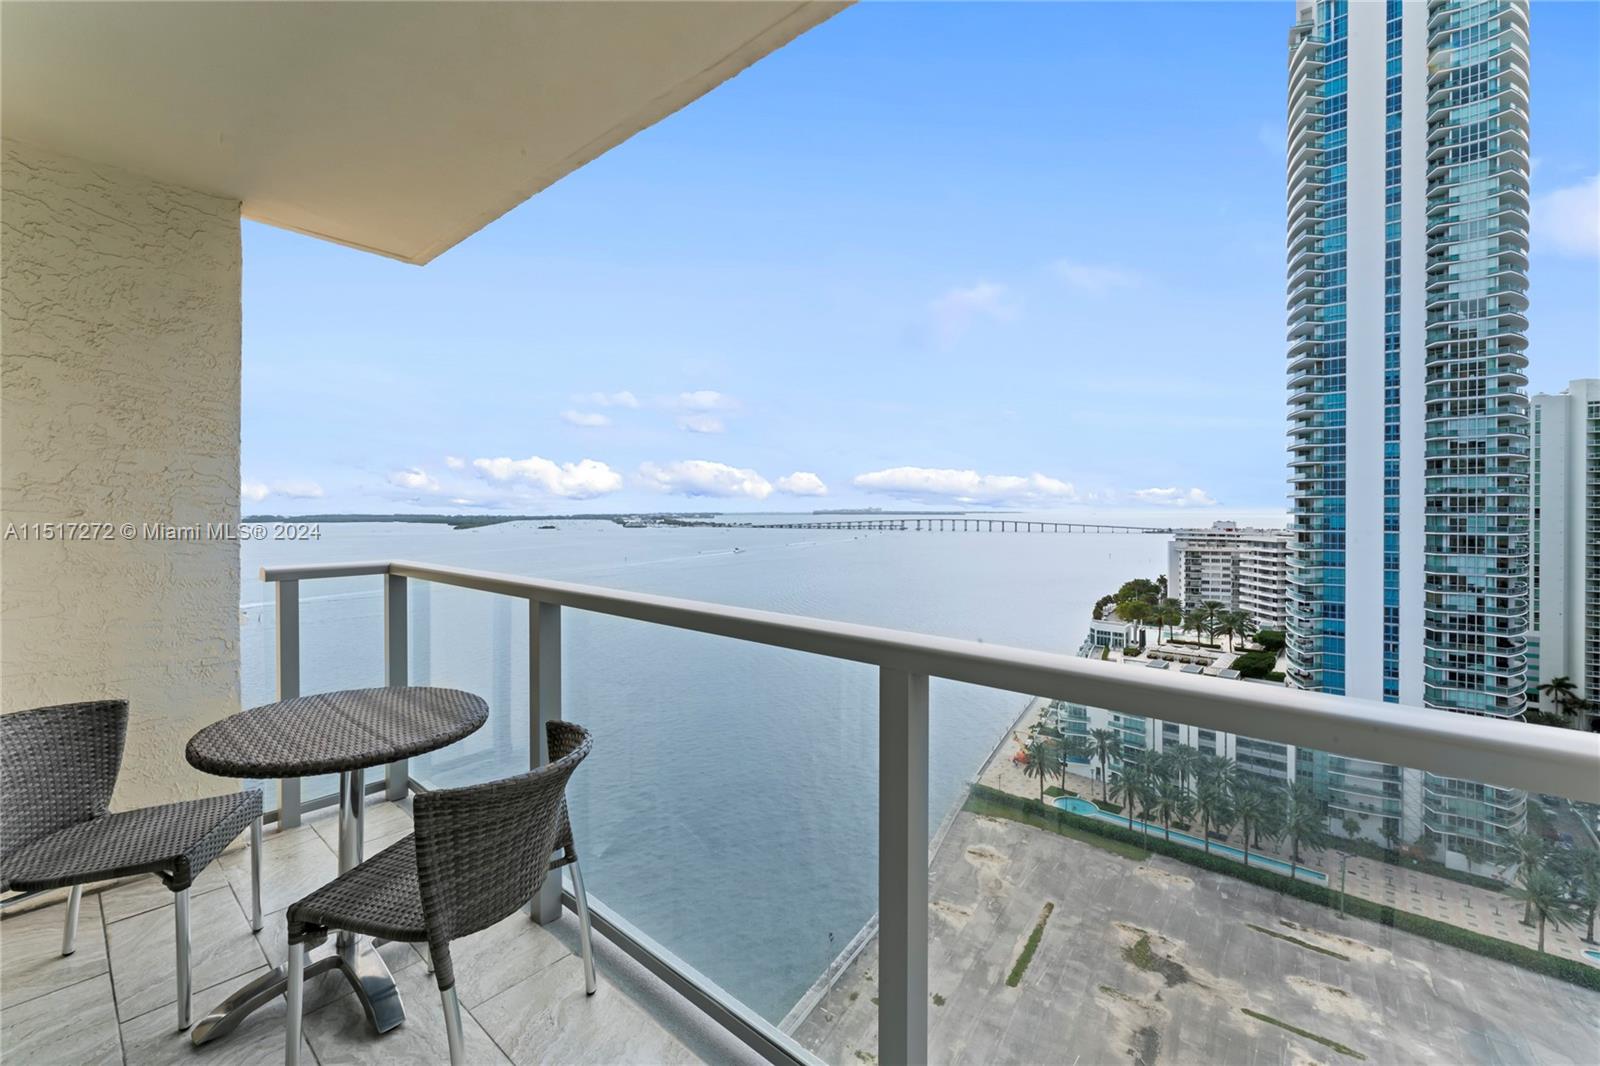 1155  Brickell Bay Dr #2009 For Sale A11517272, FL